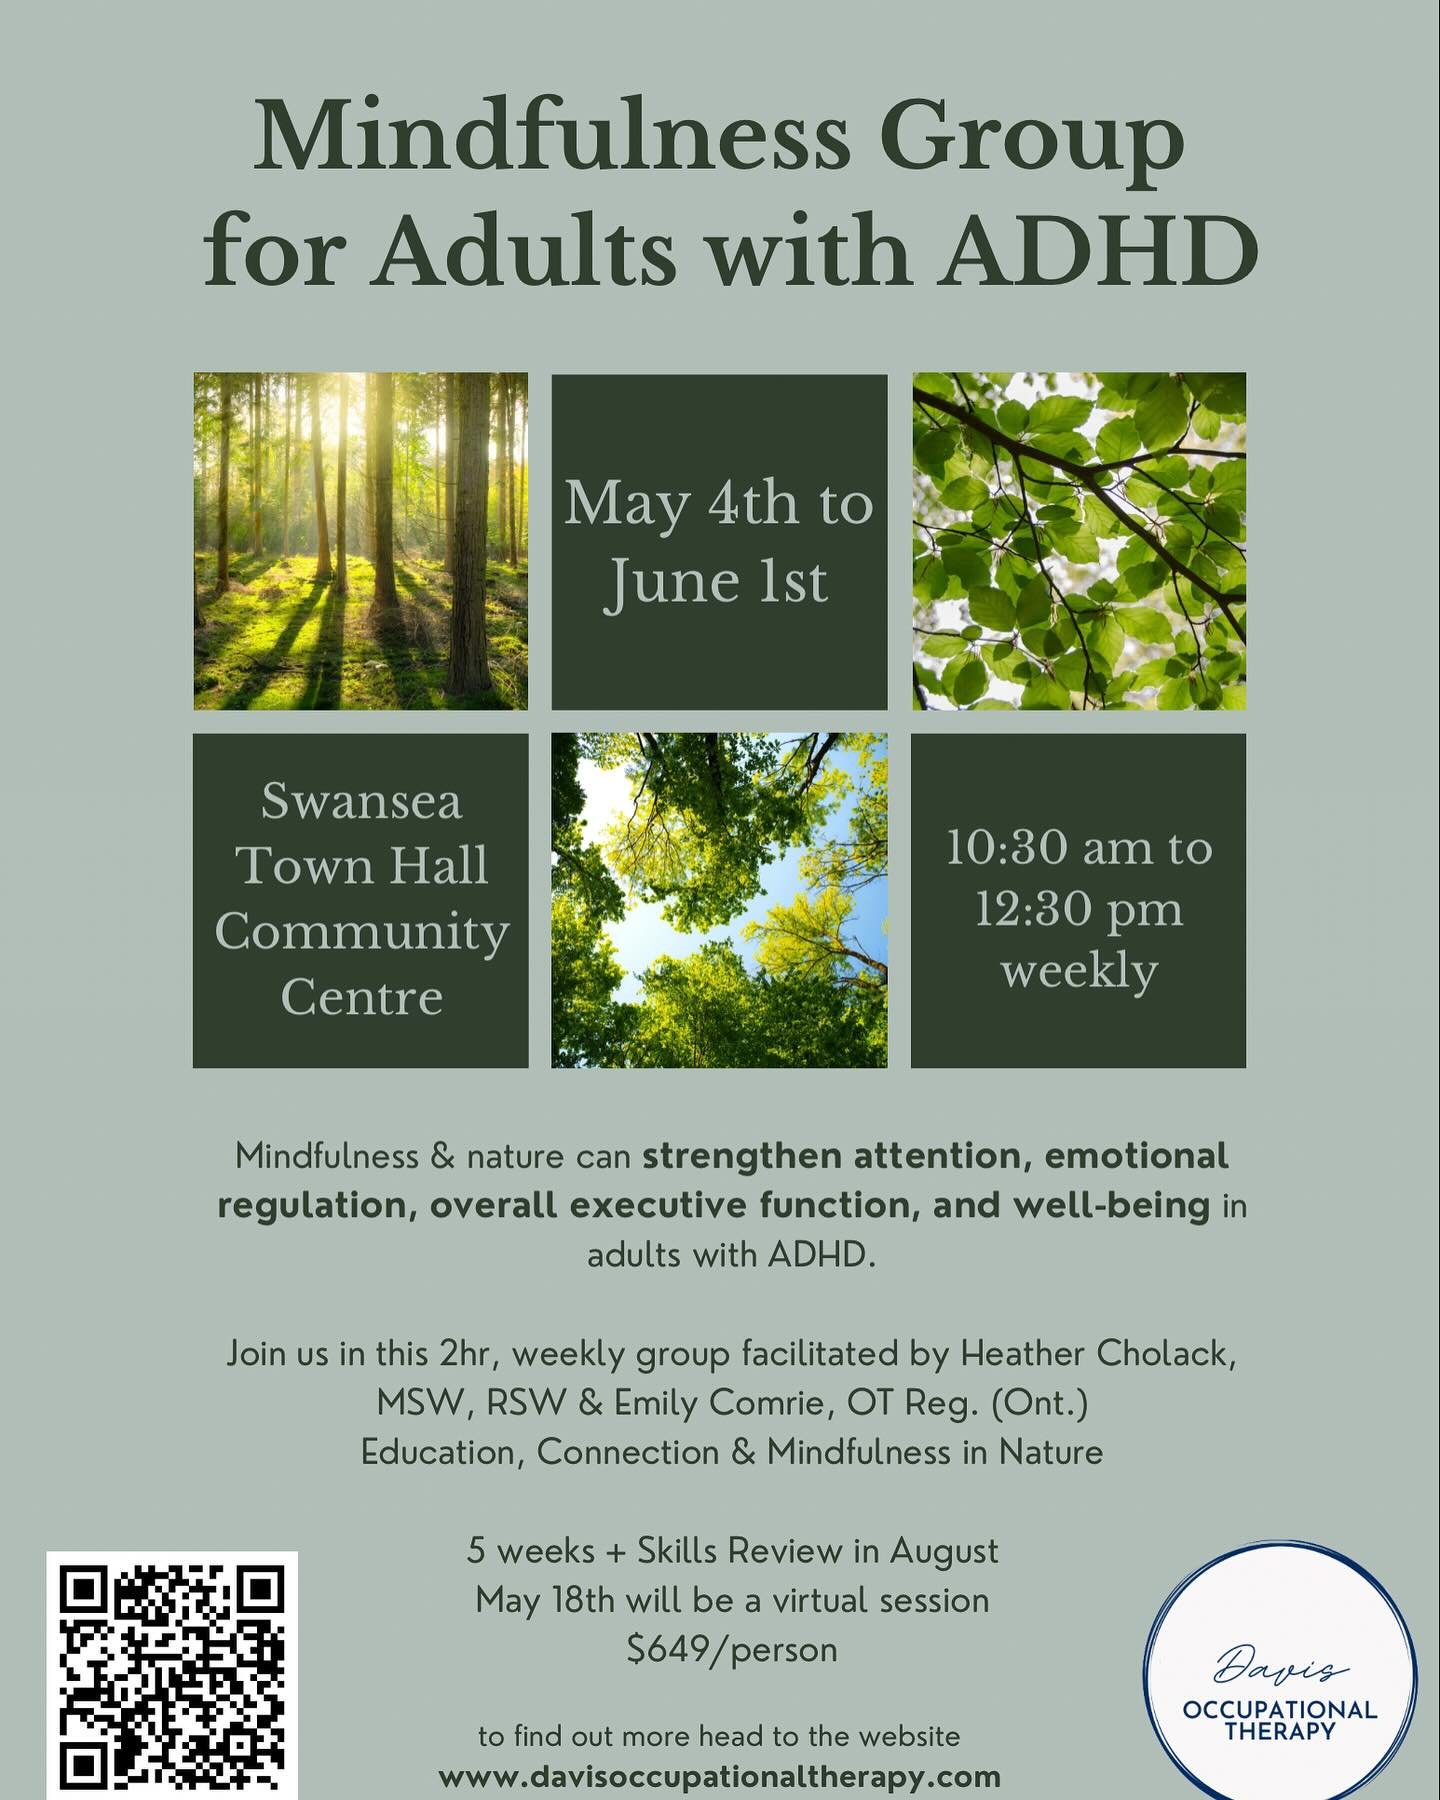 Mindfulness Group designed specifically for Adults with ADHD
🌳2 hrs of small group therapy each week
🌳Led by a Social Worker &amp; OT
🌳Split invoice allows you to maximize your extended healthcare benefits!
🌳Weekly education, group discussion, in